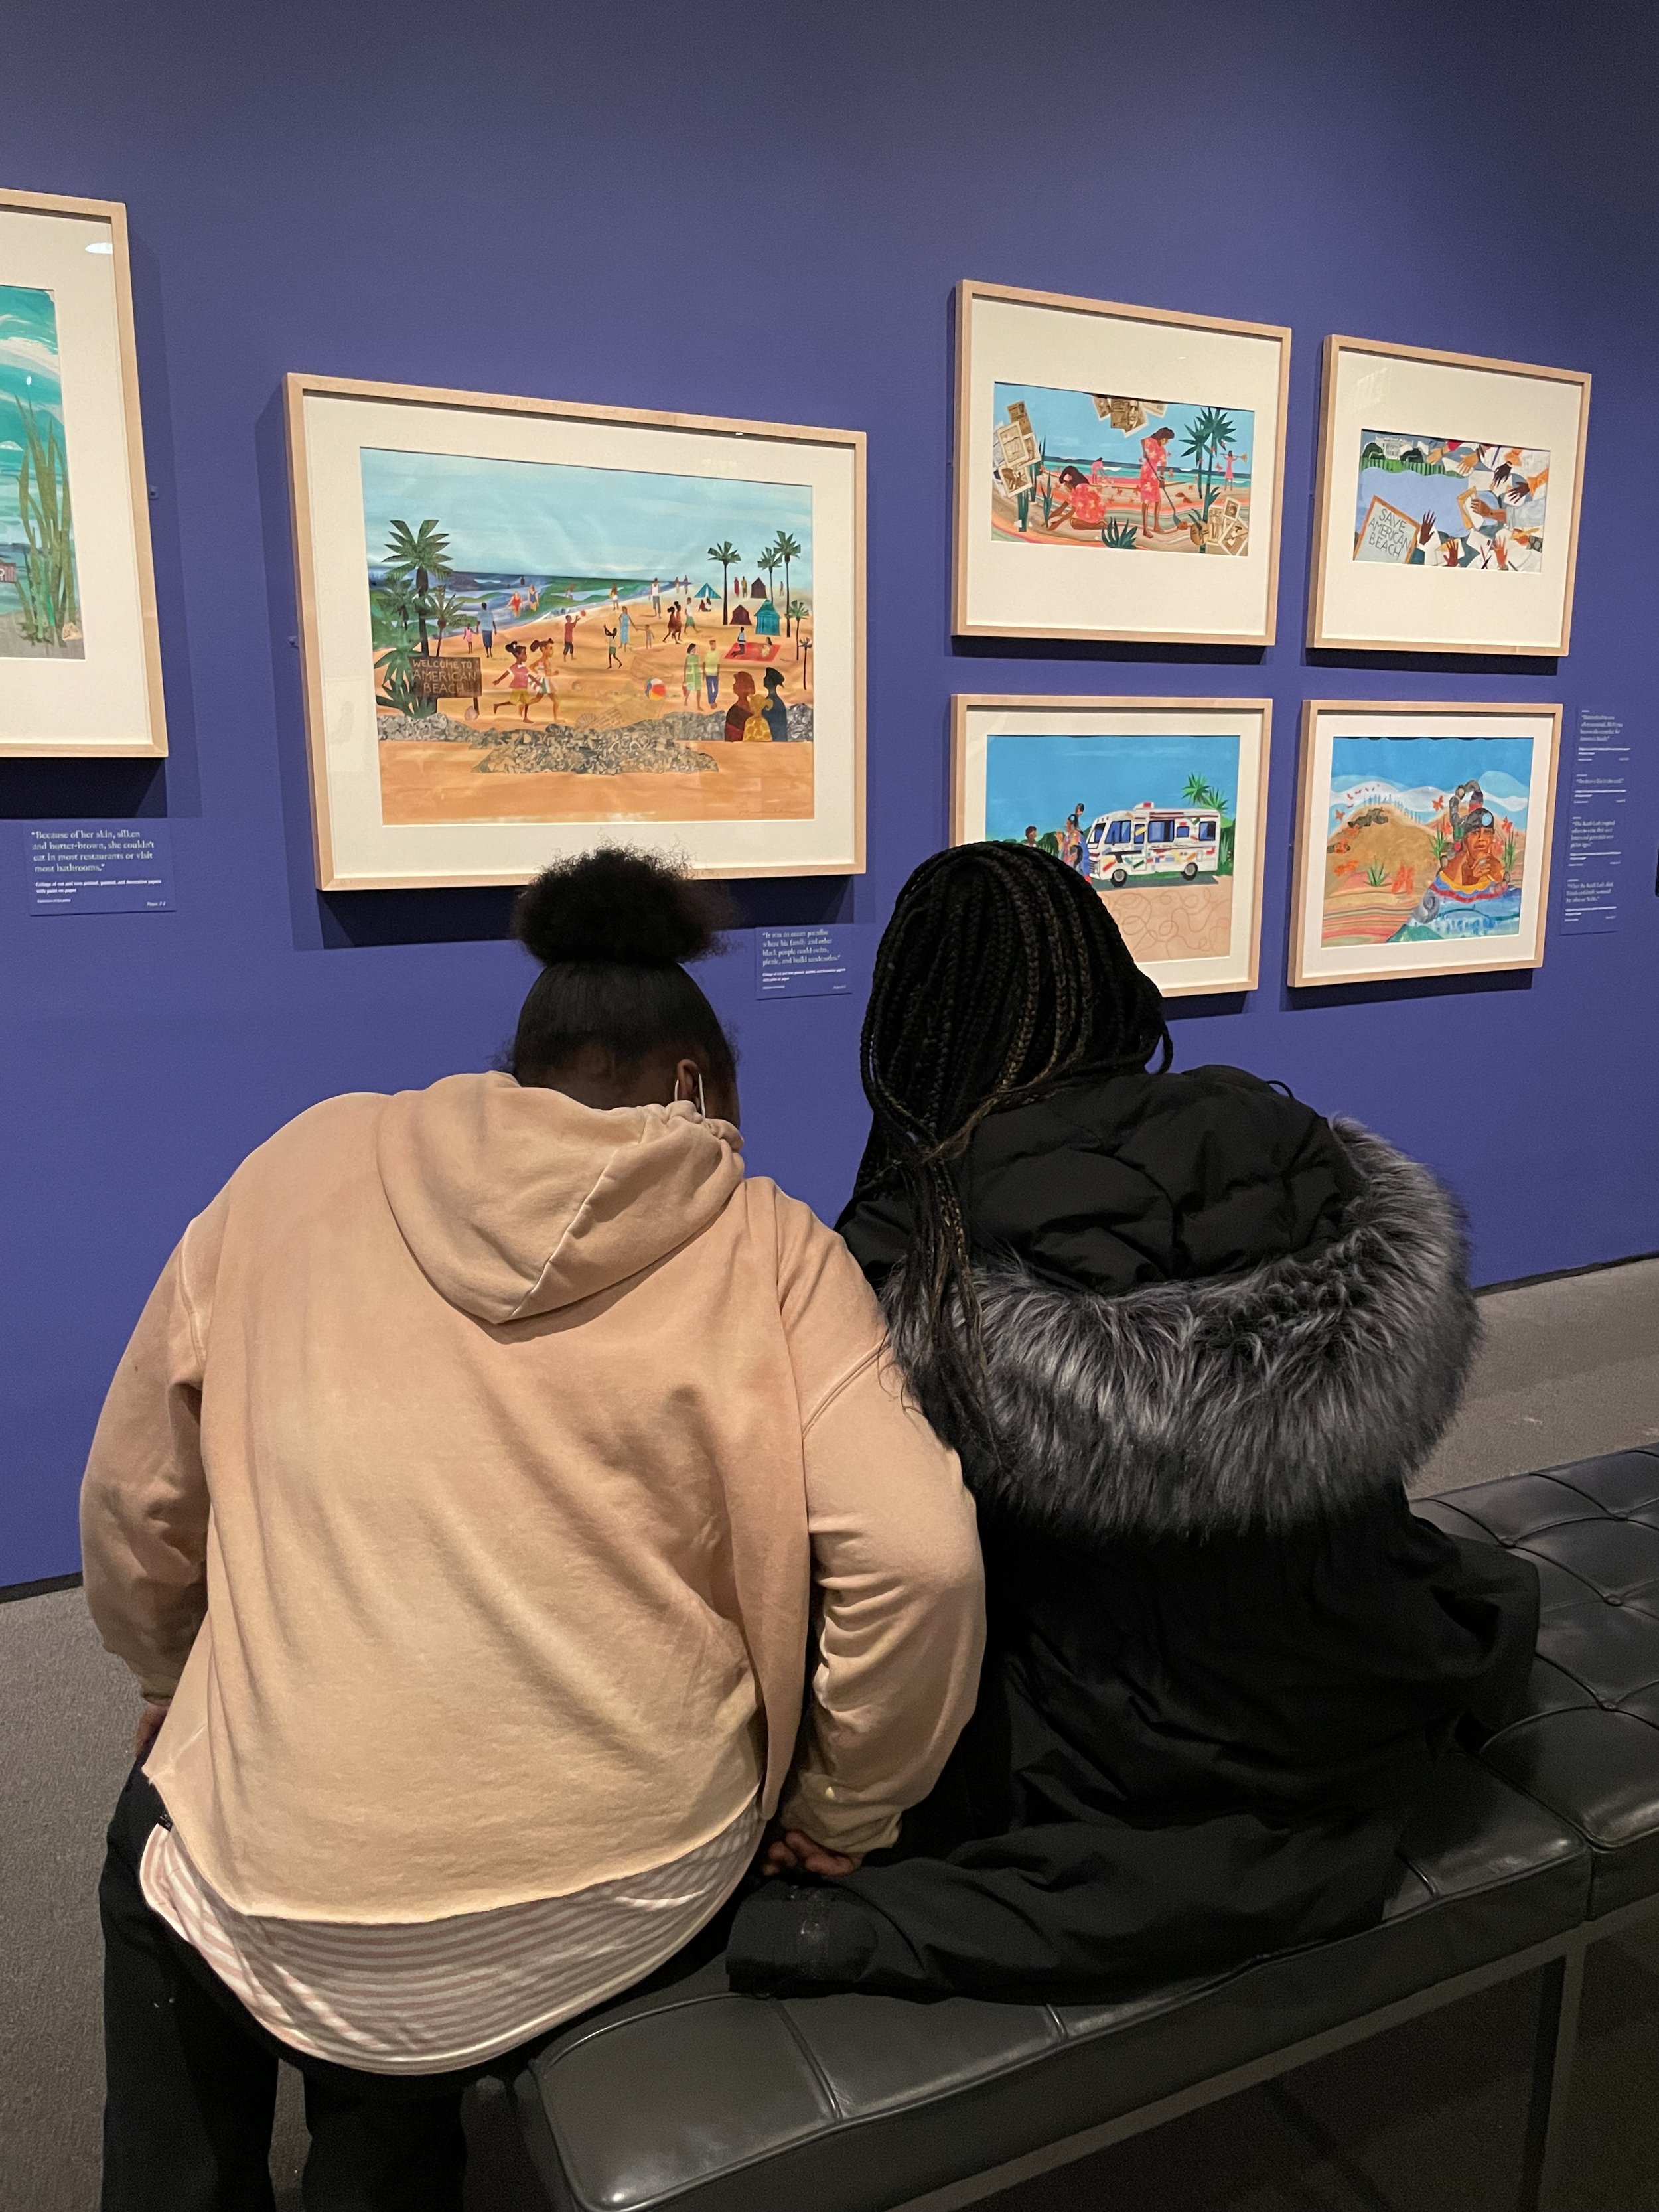    Dalila and Harmony observing the art.   